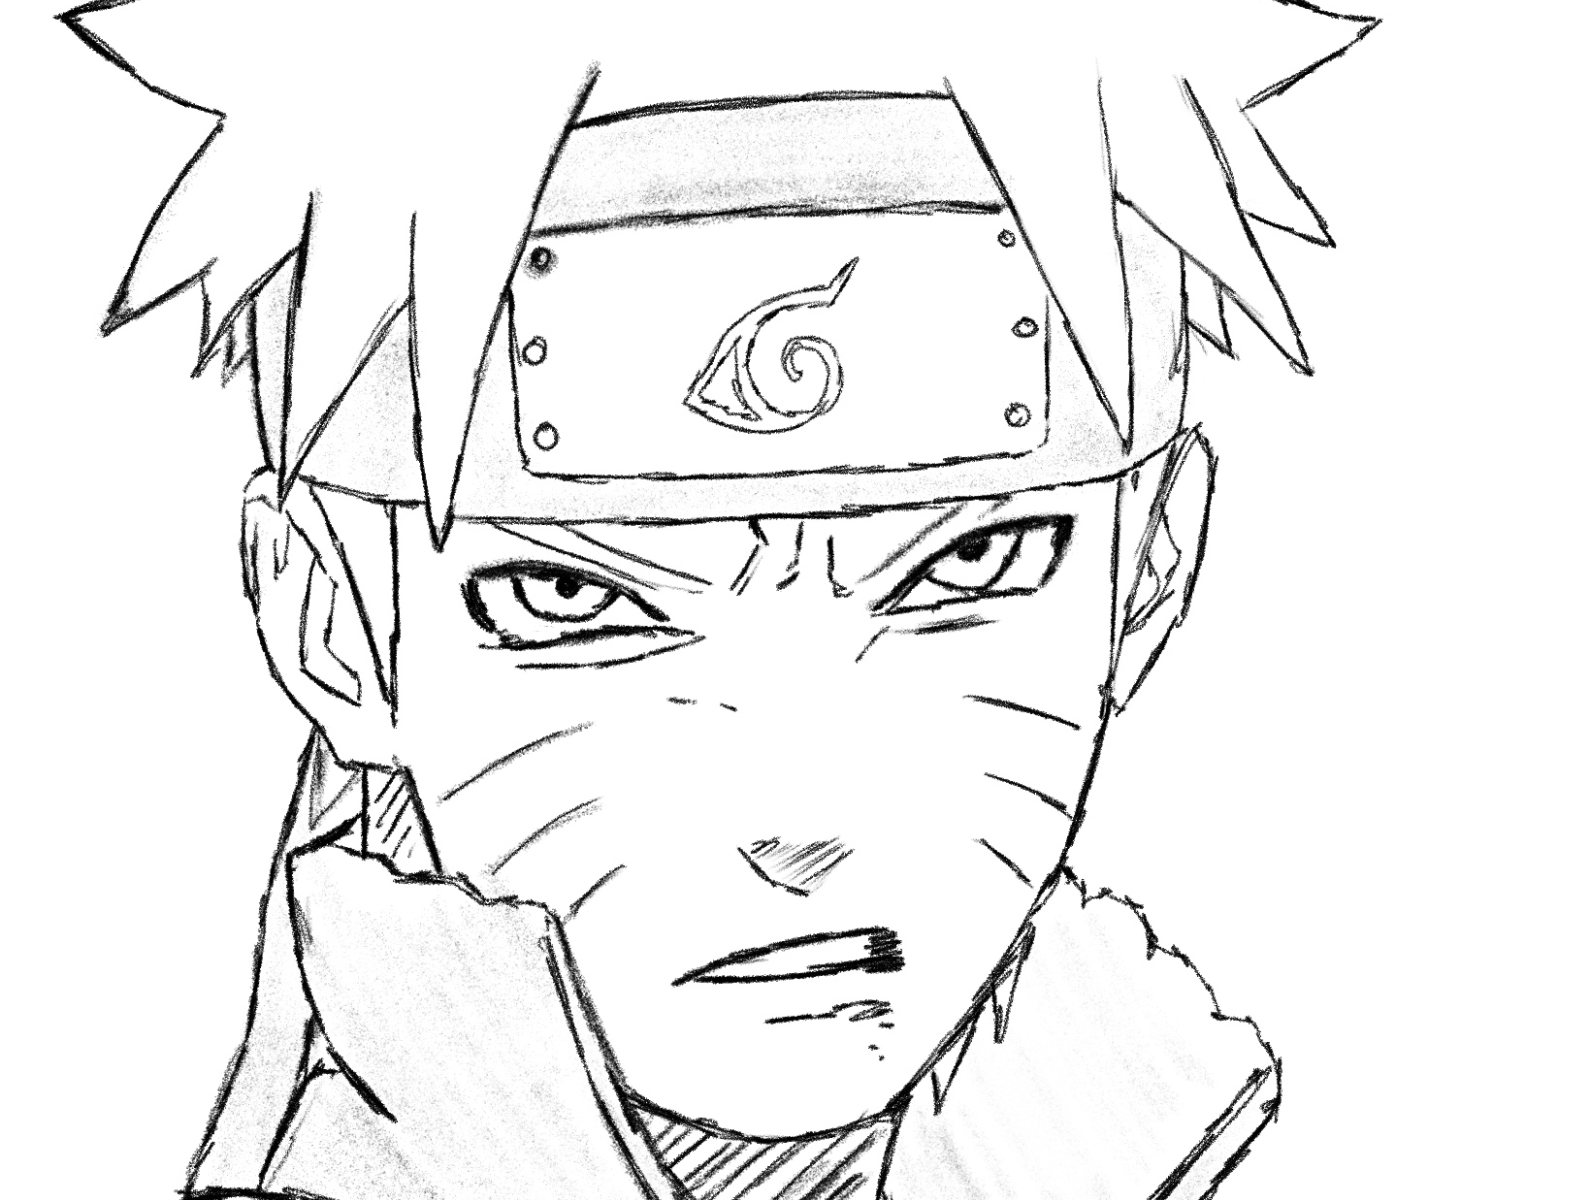 22 Awesome Naruto Drawings for Anime Artists - Beautiful Dawn Designs